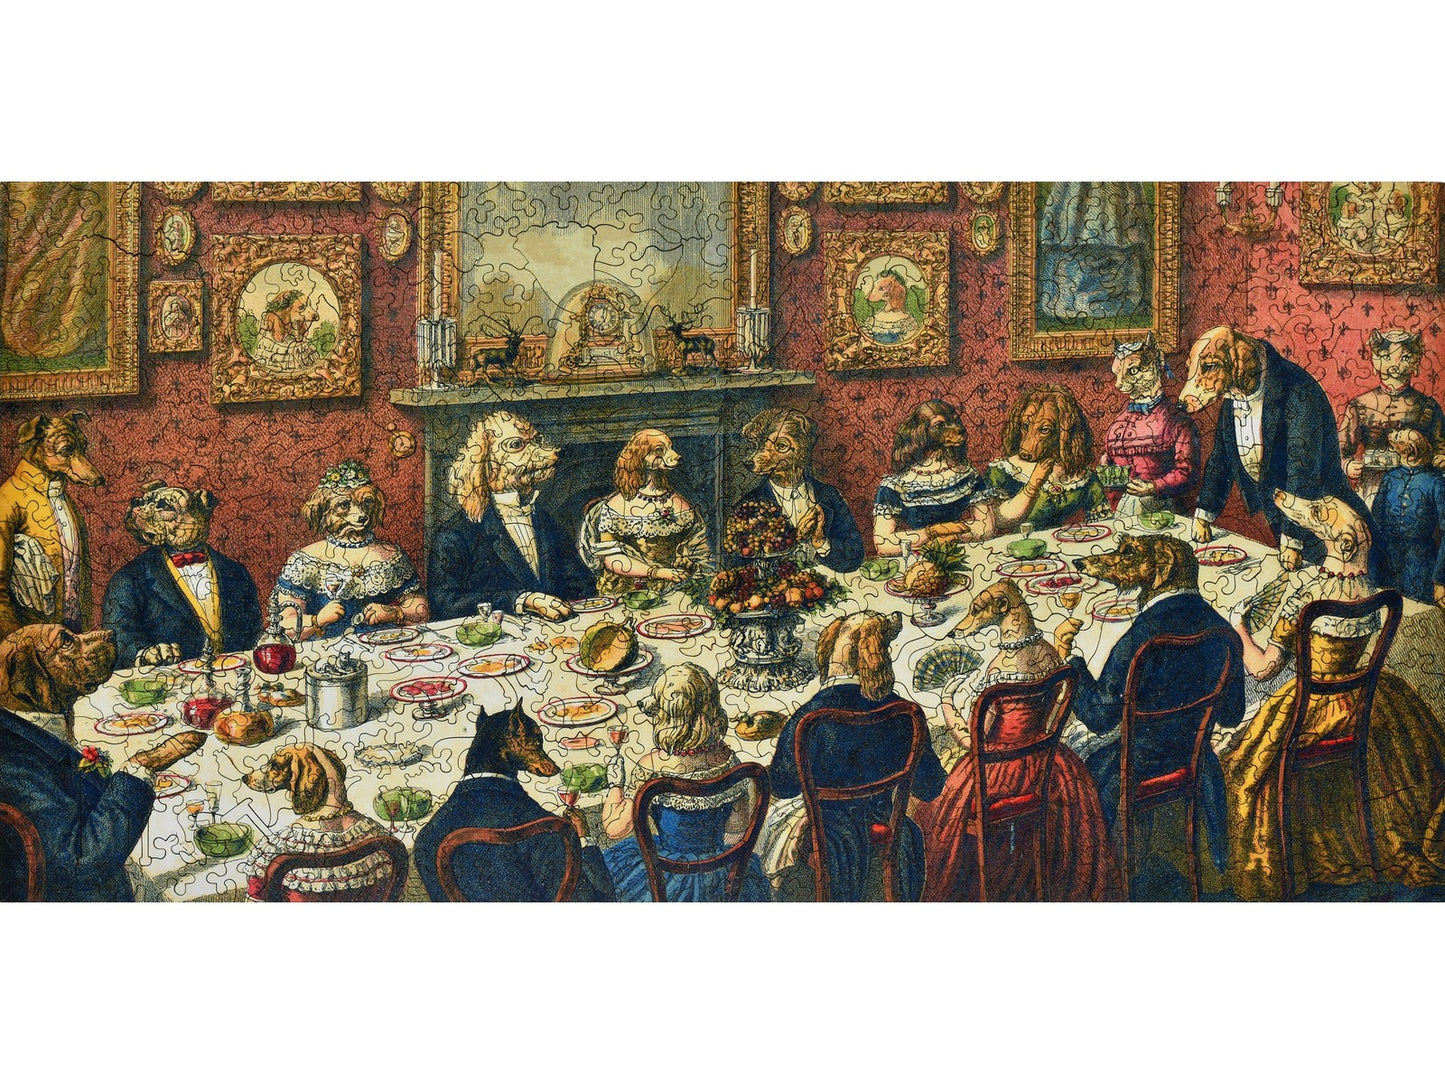 The front of the puzzle, The Dogs Dinner Party, which shows lots of dogs dressed up and having a fancy dinner.